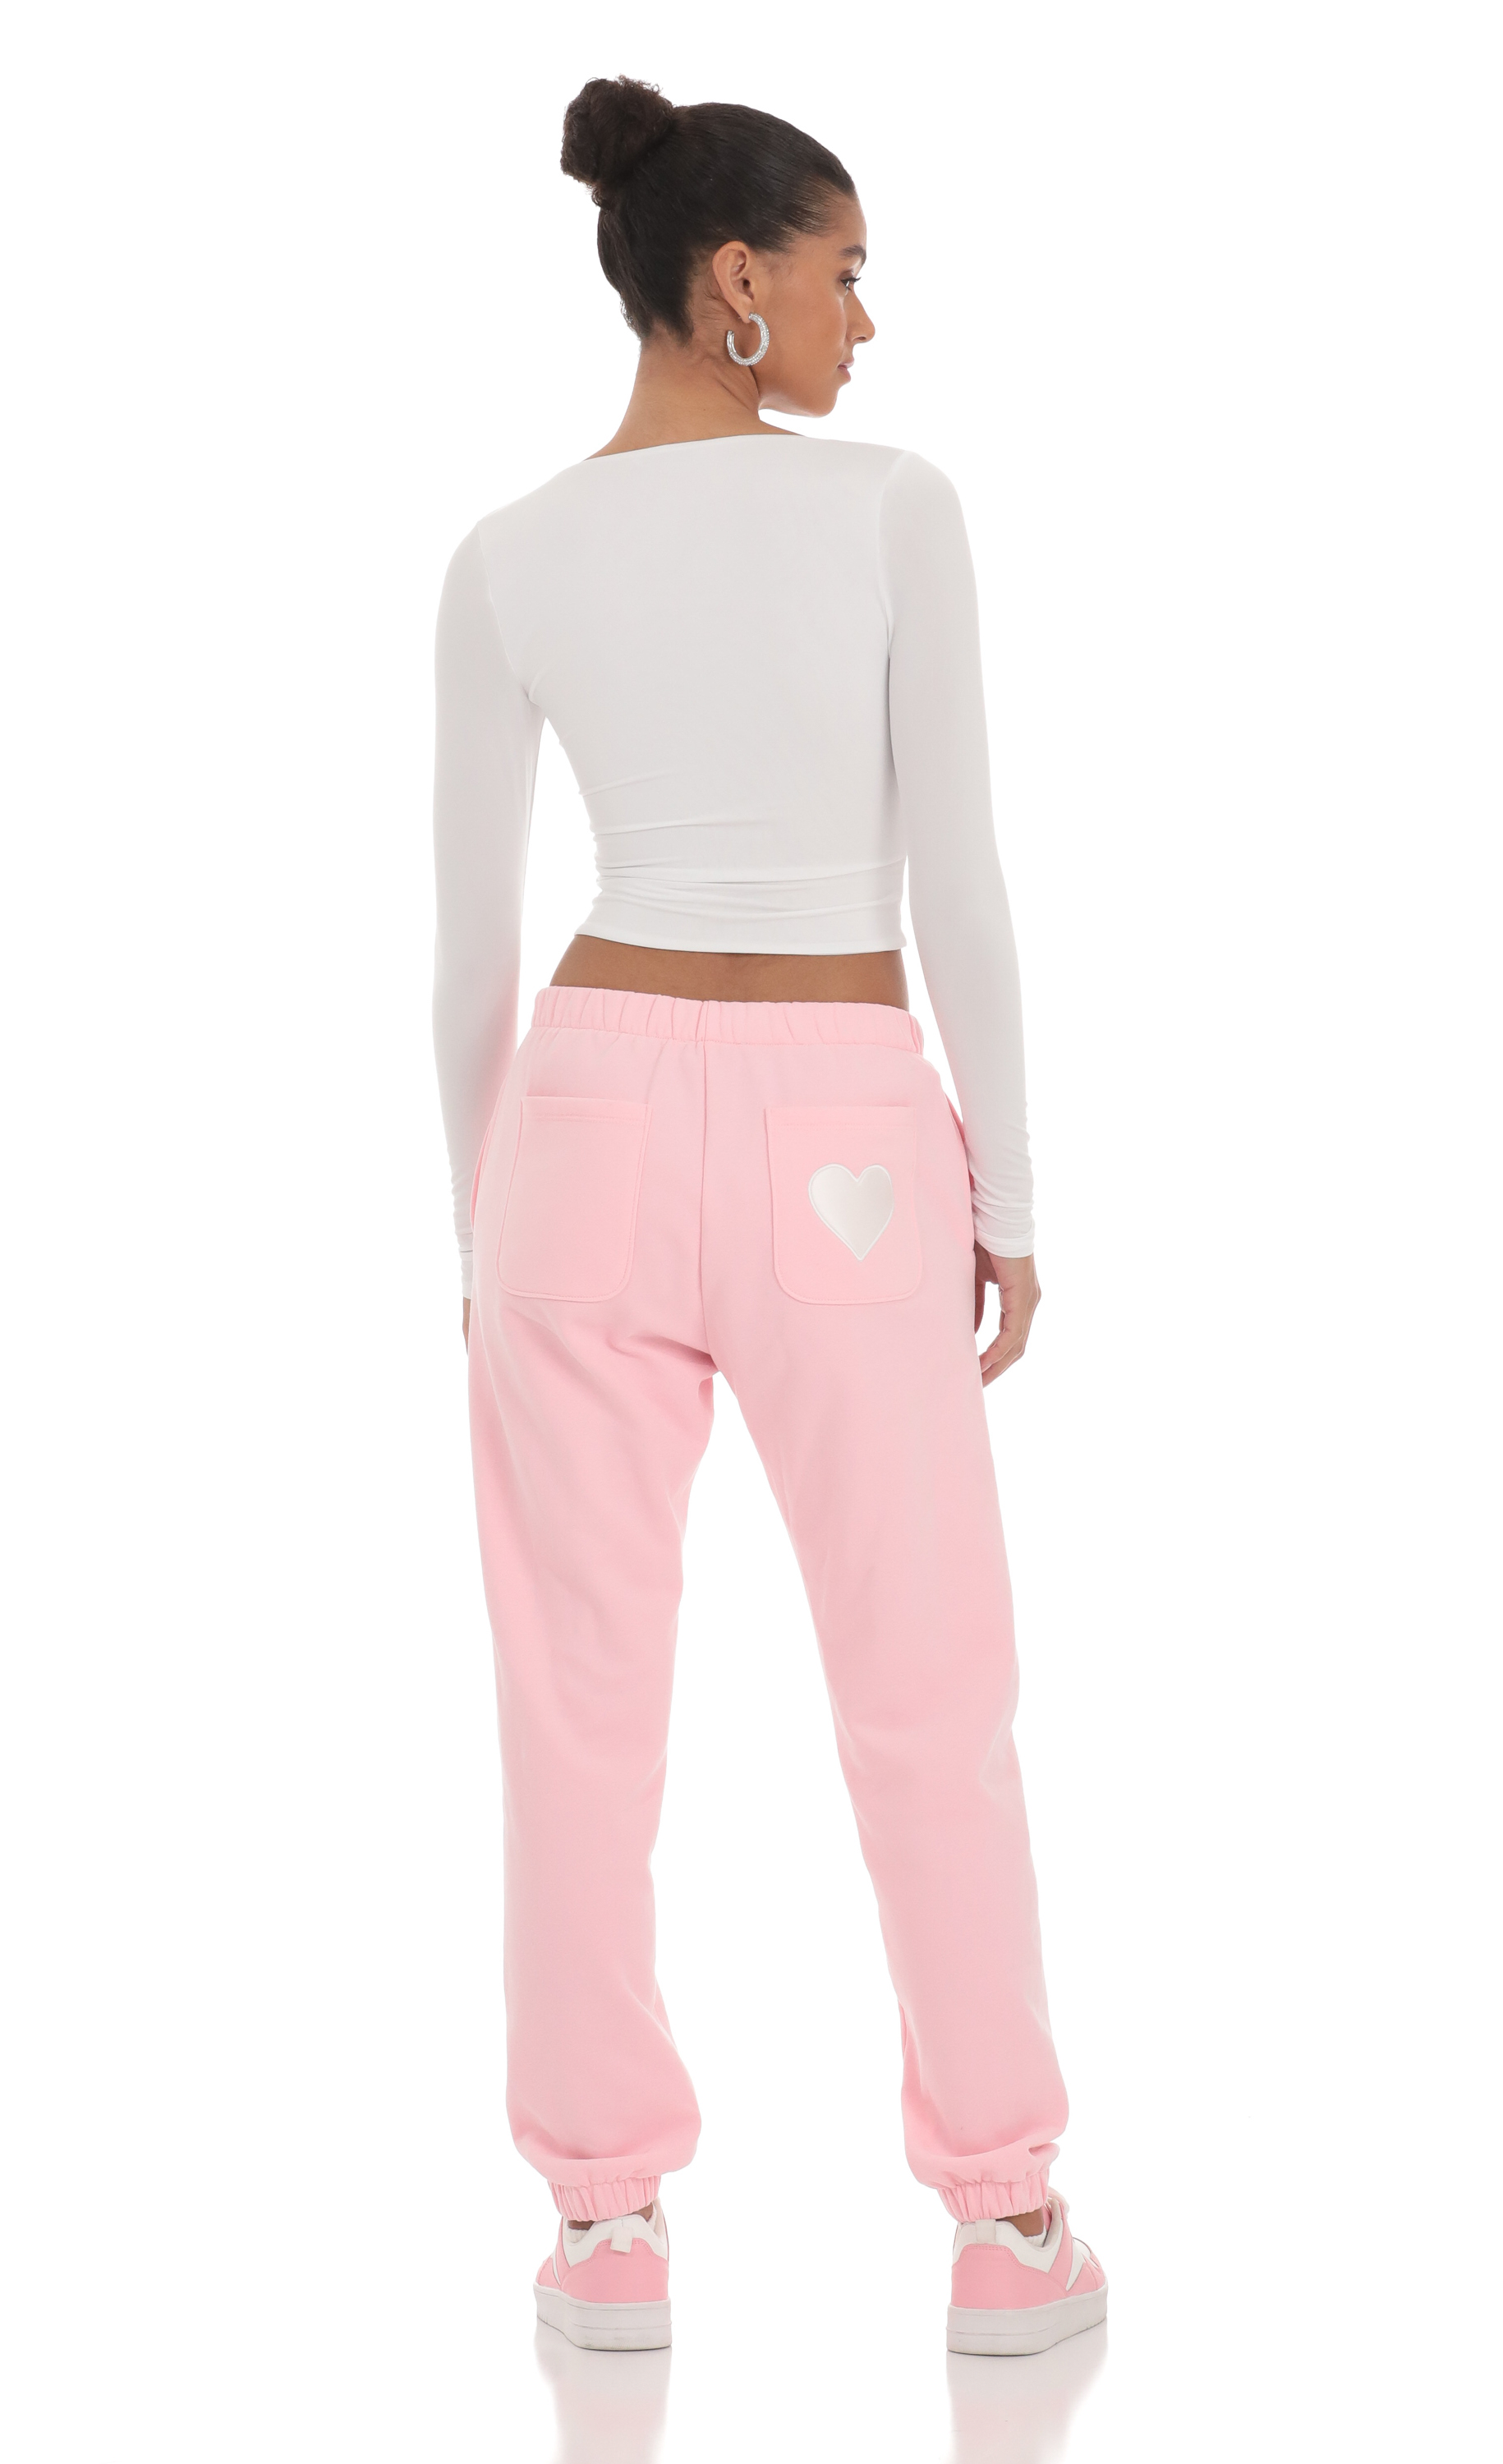 Heart Cinched Sweatpants in Pink